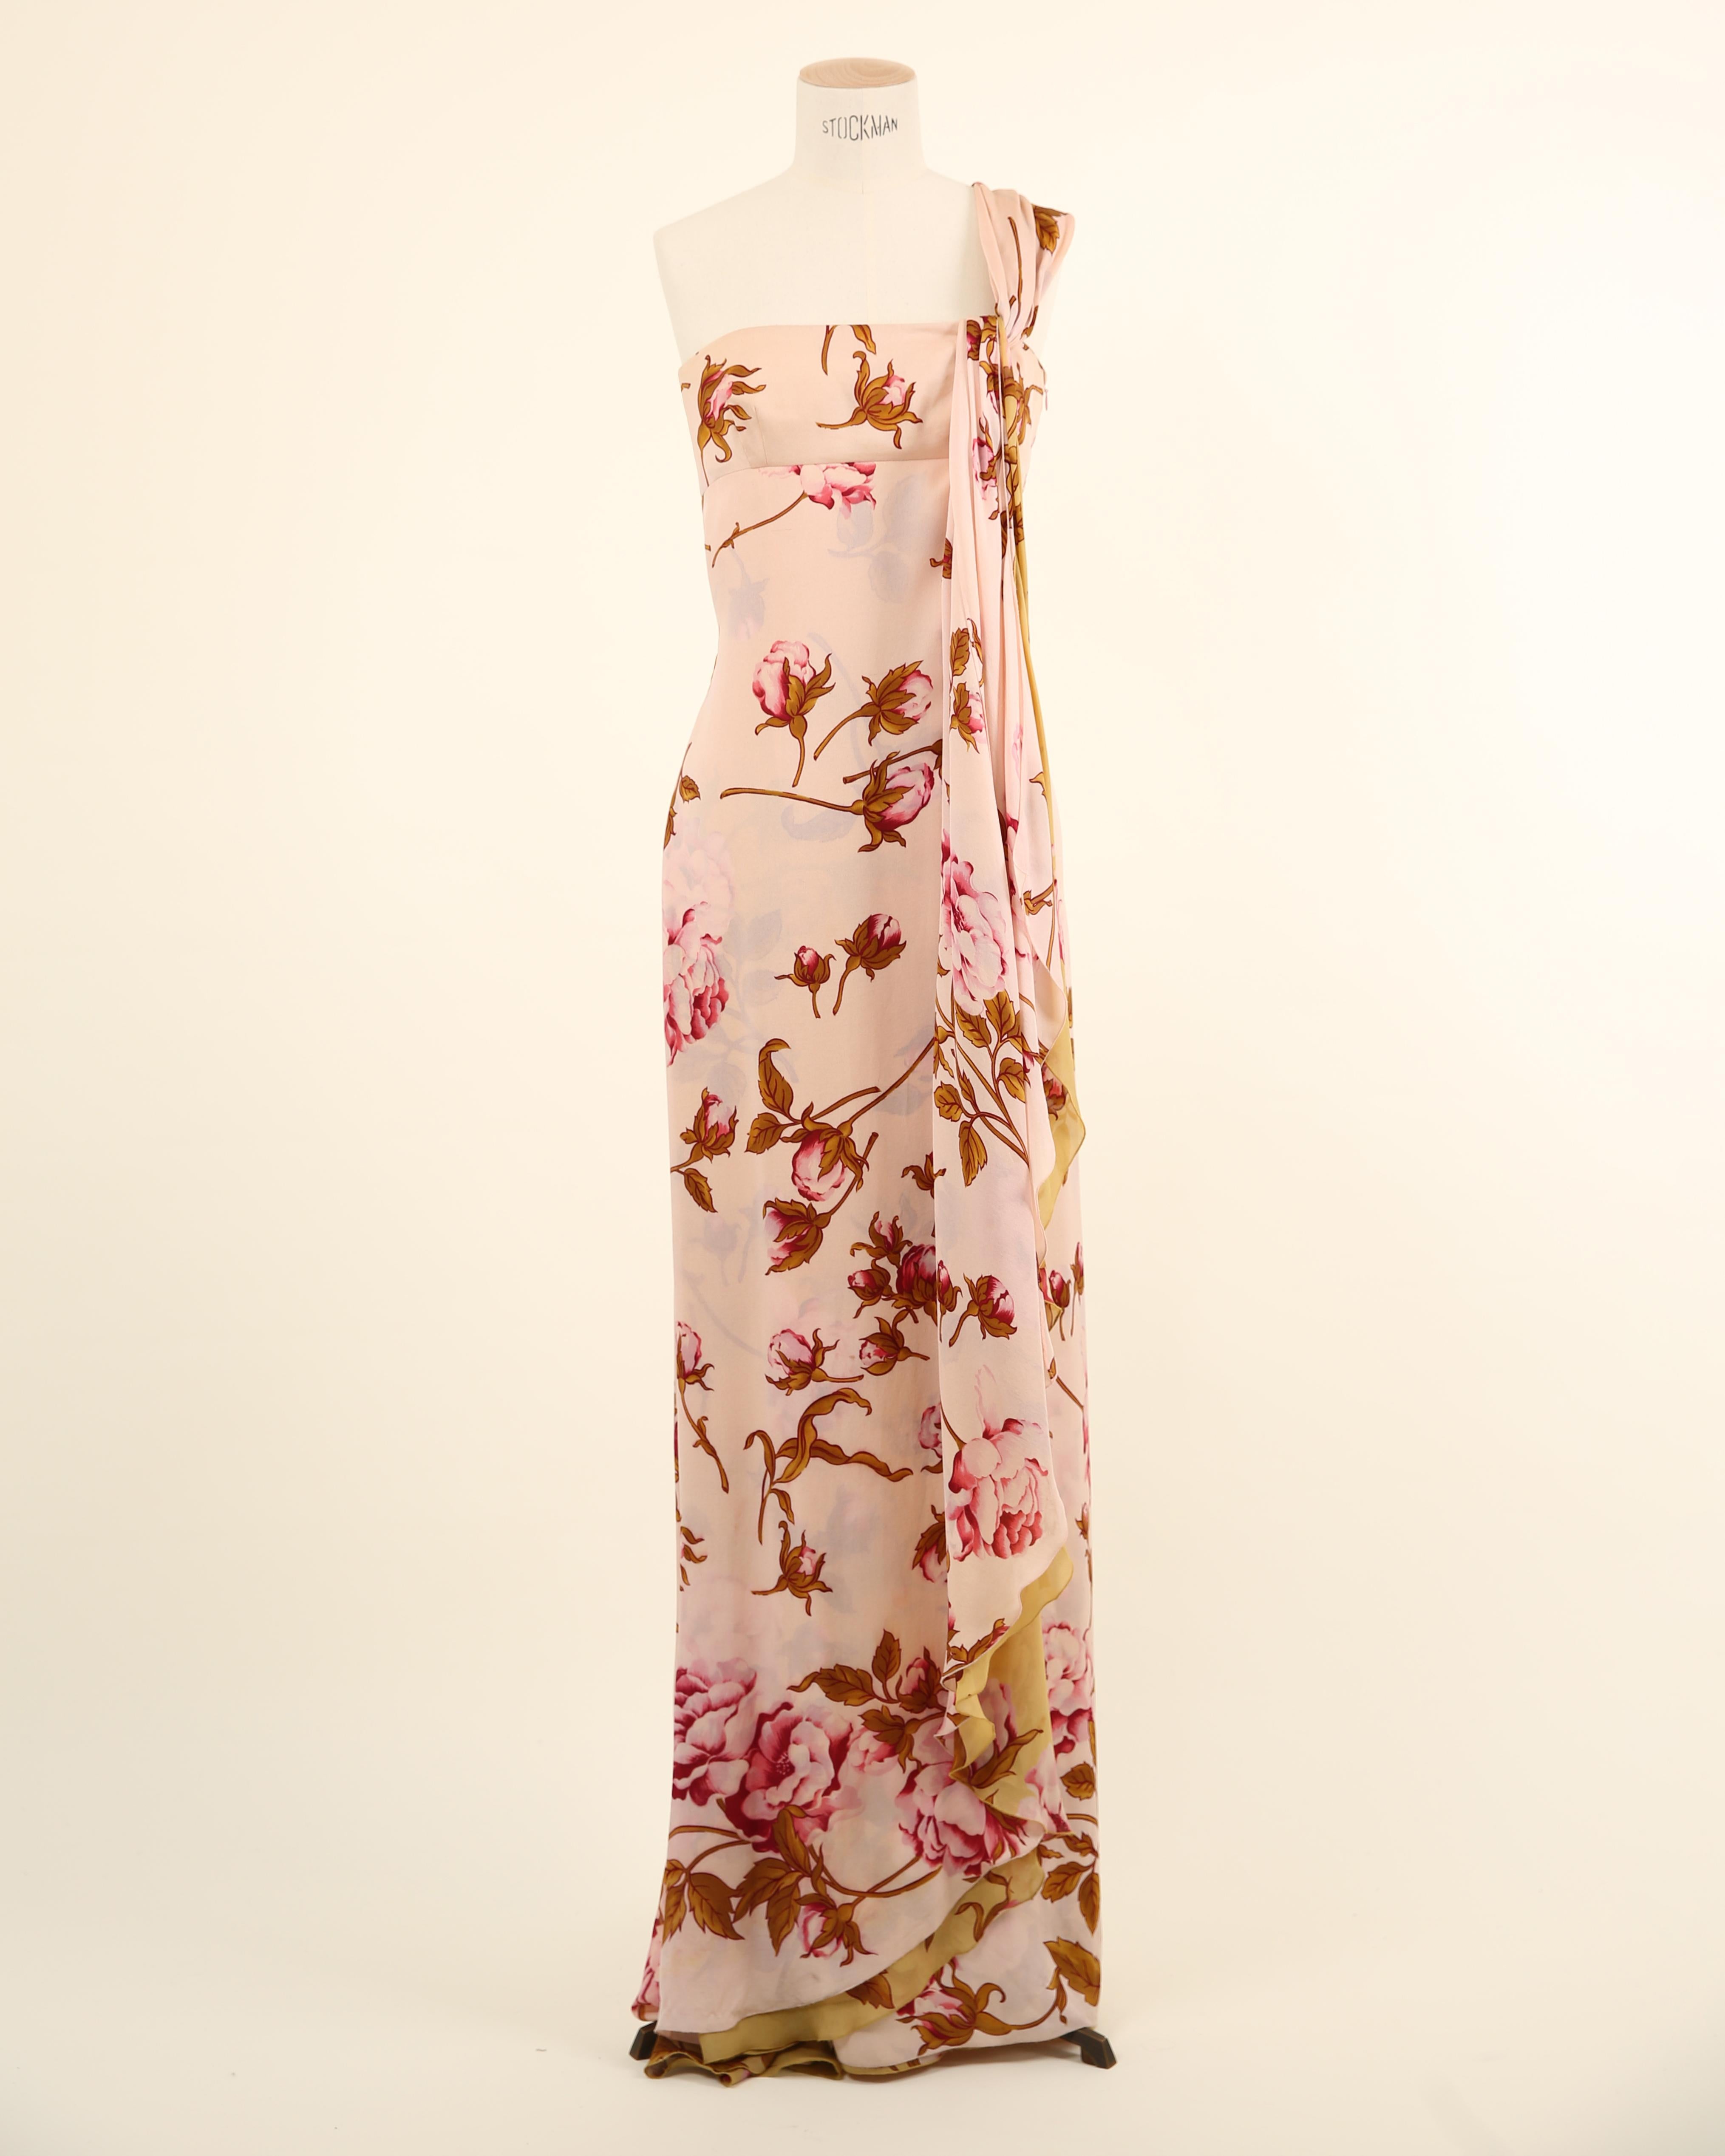 Valentino S/S 06 pink yellow rose print floral one shoulder gown train dress In Fair Condition For Sale In Paris, FR